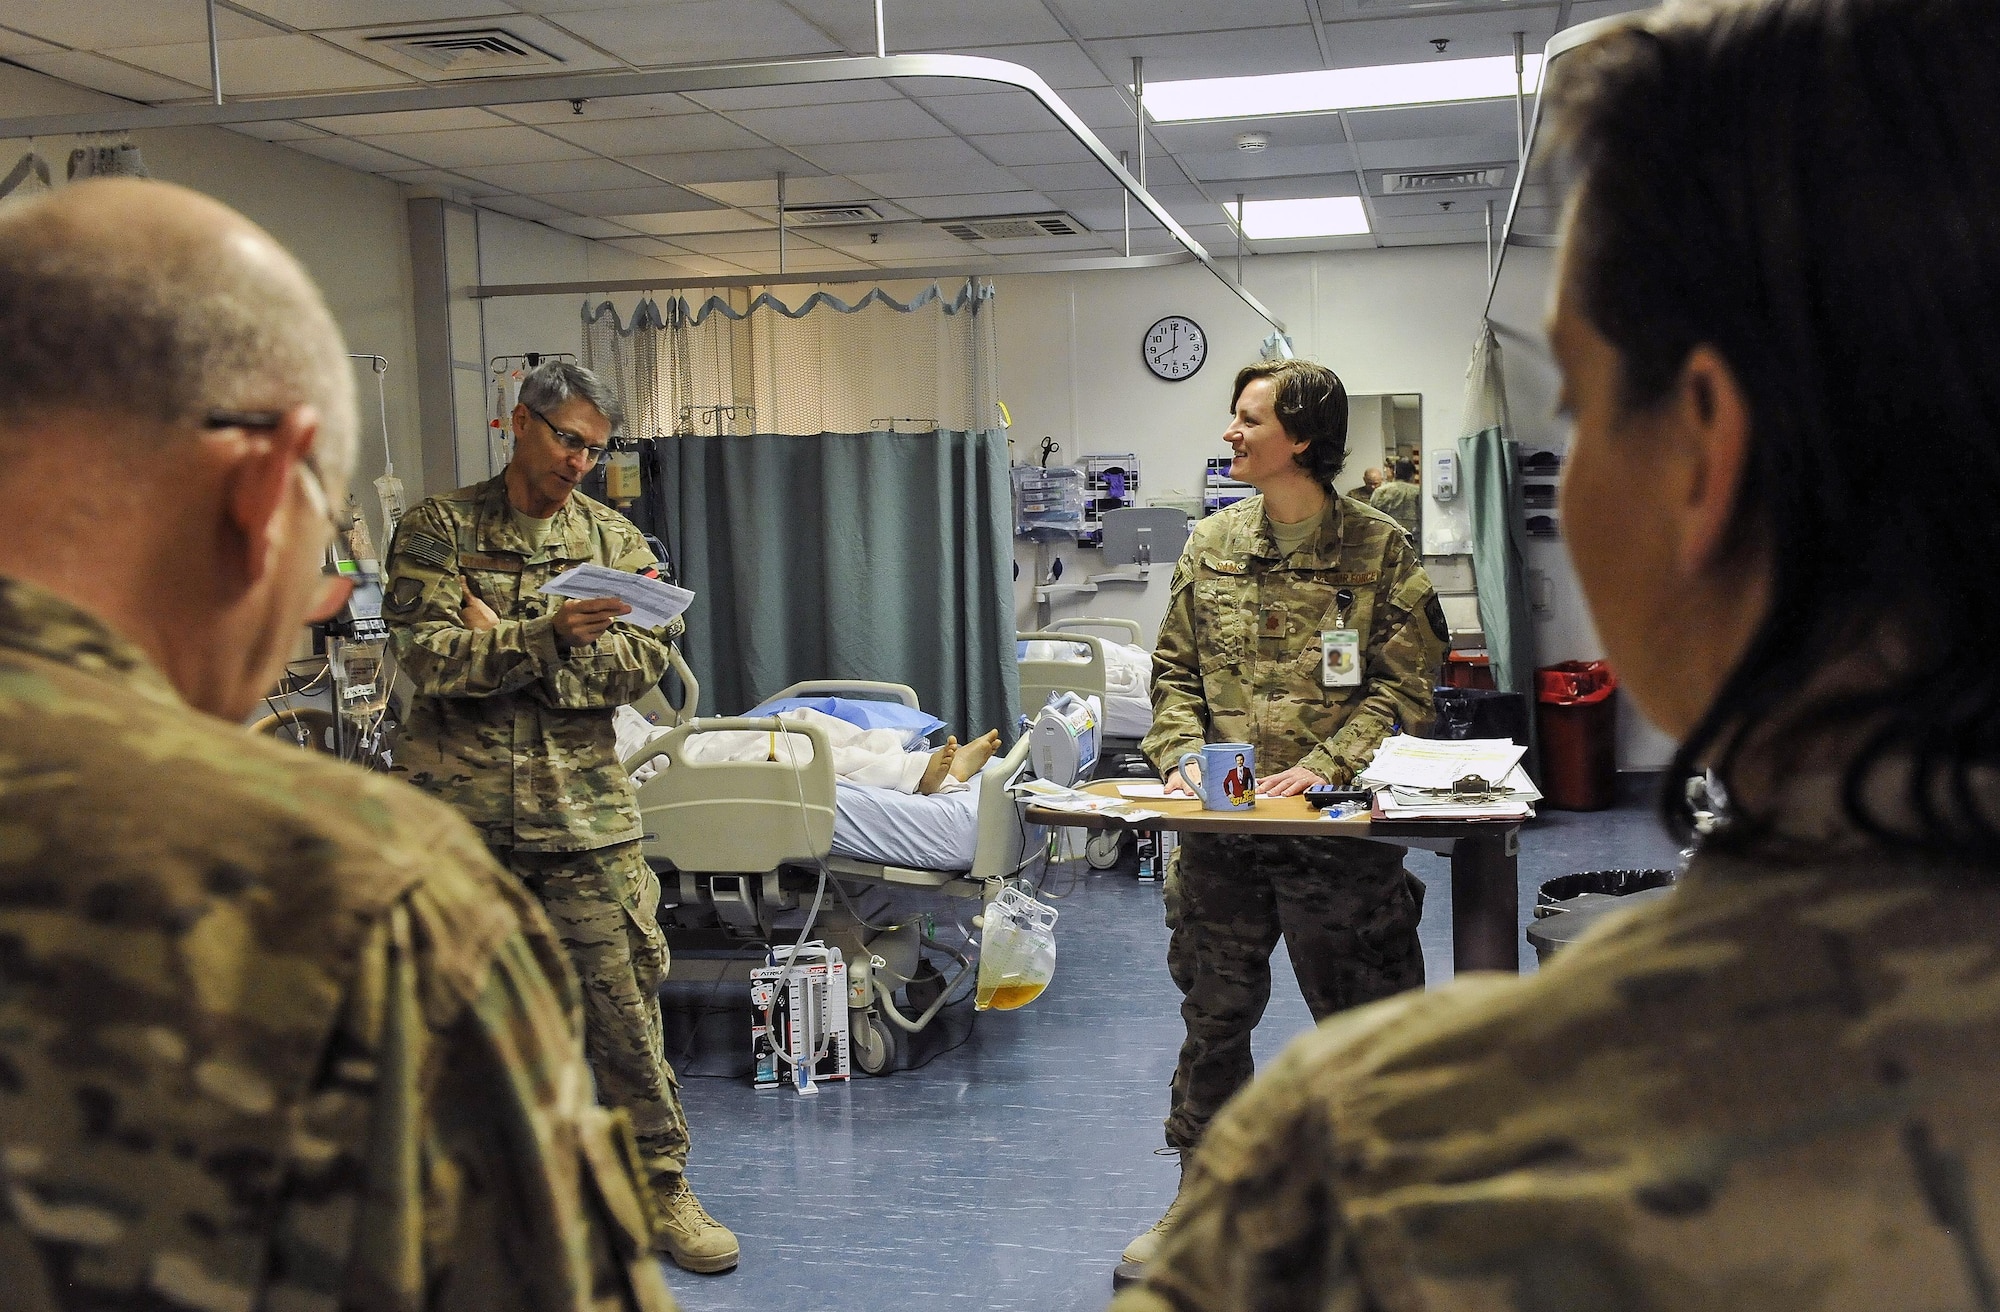 Maj. (Dr.) Valerie Sams, 455th Expeditionary Medical Group trauma czar, listens to a patient progress and treatments from Lt. Col. (Dr.) Robert Stankewitz, 455th EMDG staff physician, at Craig Joint-Theater Hospital on Bagram Air Field, Afghanistan, March 5, 2016. The trauma czar is responsible for coordinating patient care and making the final decision on treatment. (U.S. Air Force photo by Tech. Sgt. Nicholas Rau)